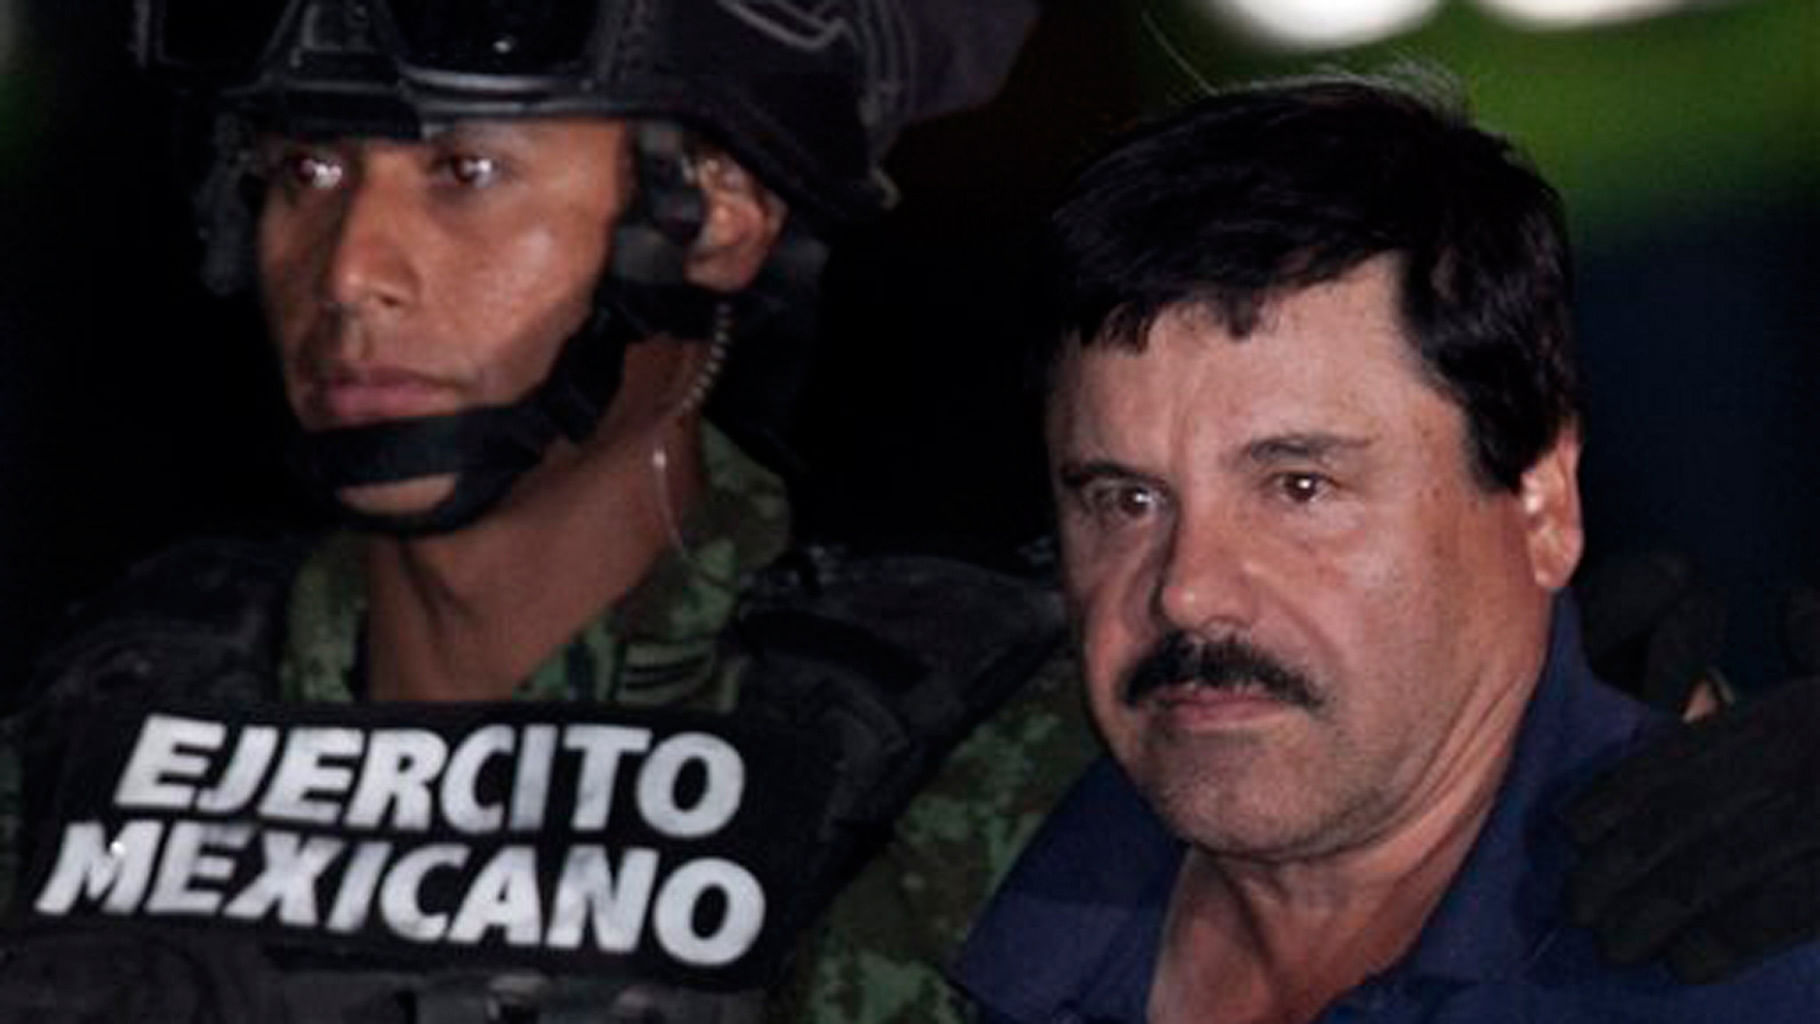 Mexican drug lord Joaquin “El Chapo” Guzman, right, is escorted by soldiers and marines to a waiting helicopter. (Photo: AP)